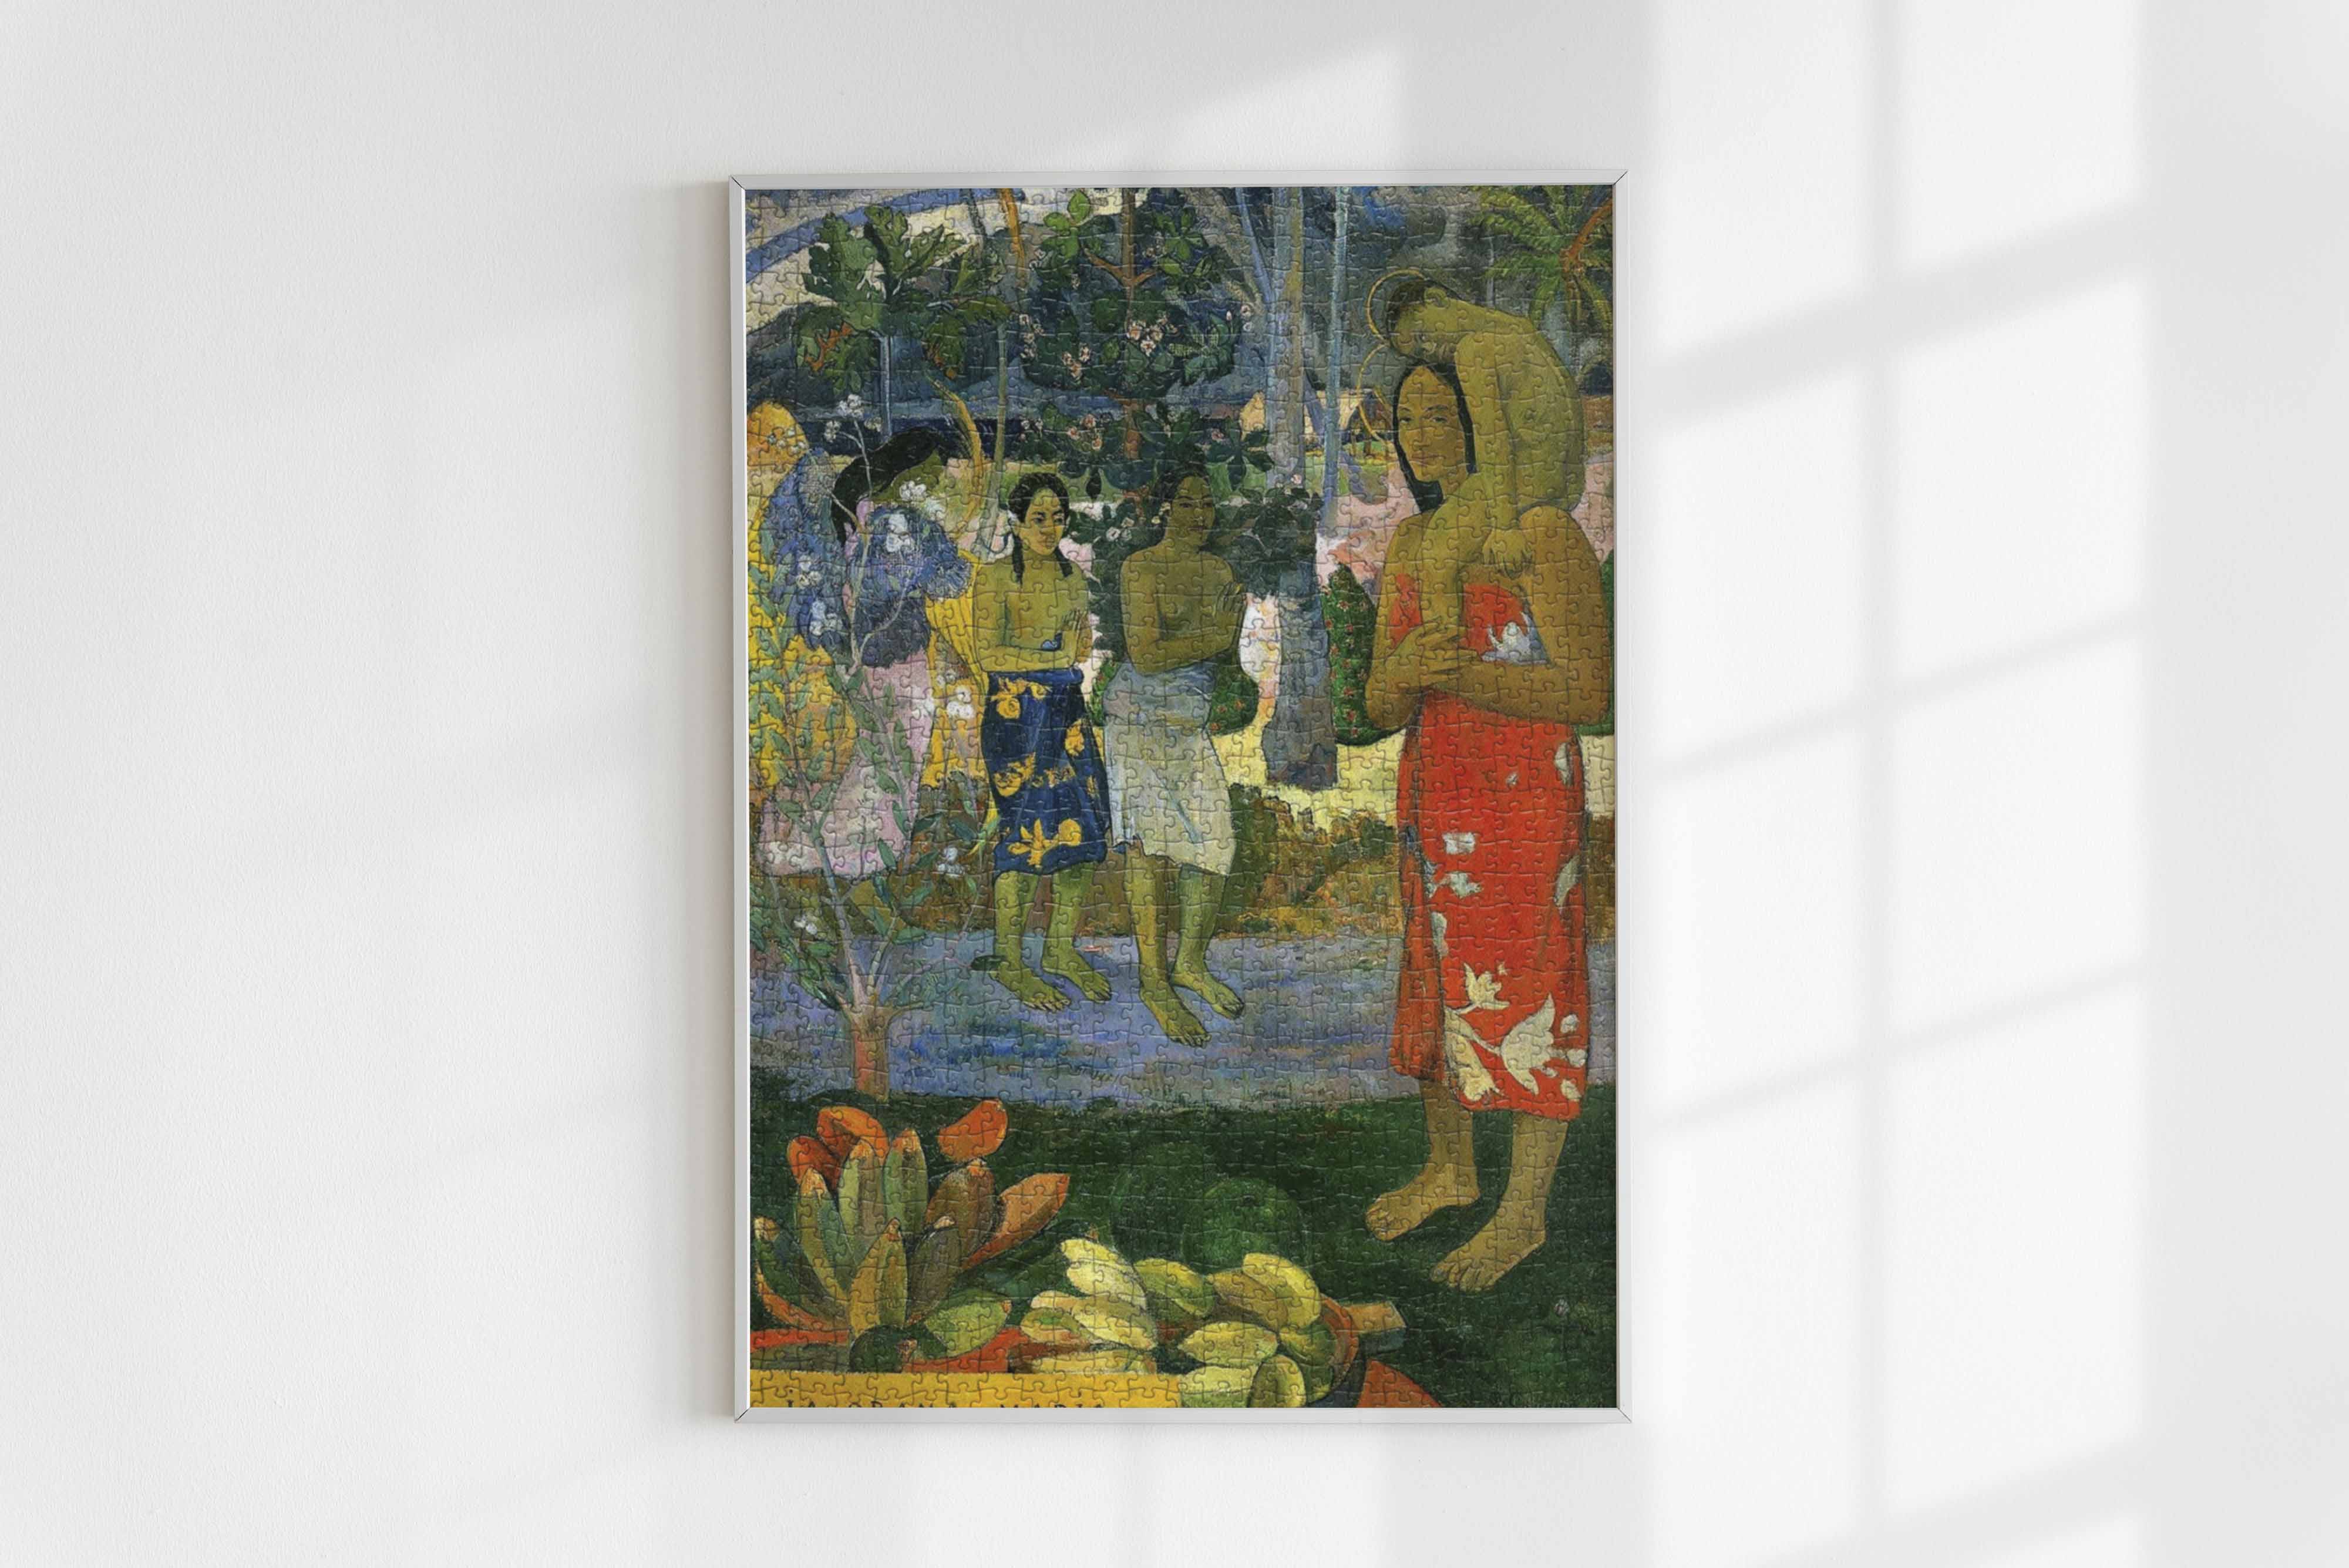 Immerse yourself in the intricate details of Paul Gauguin's La Orana Maria with this 1000-piece jigsaw puzzle.